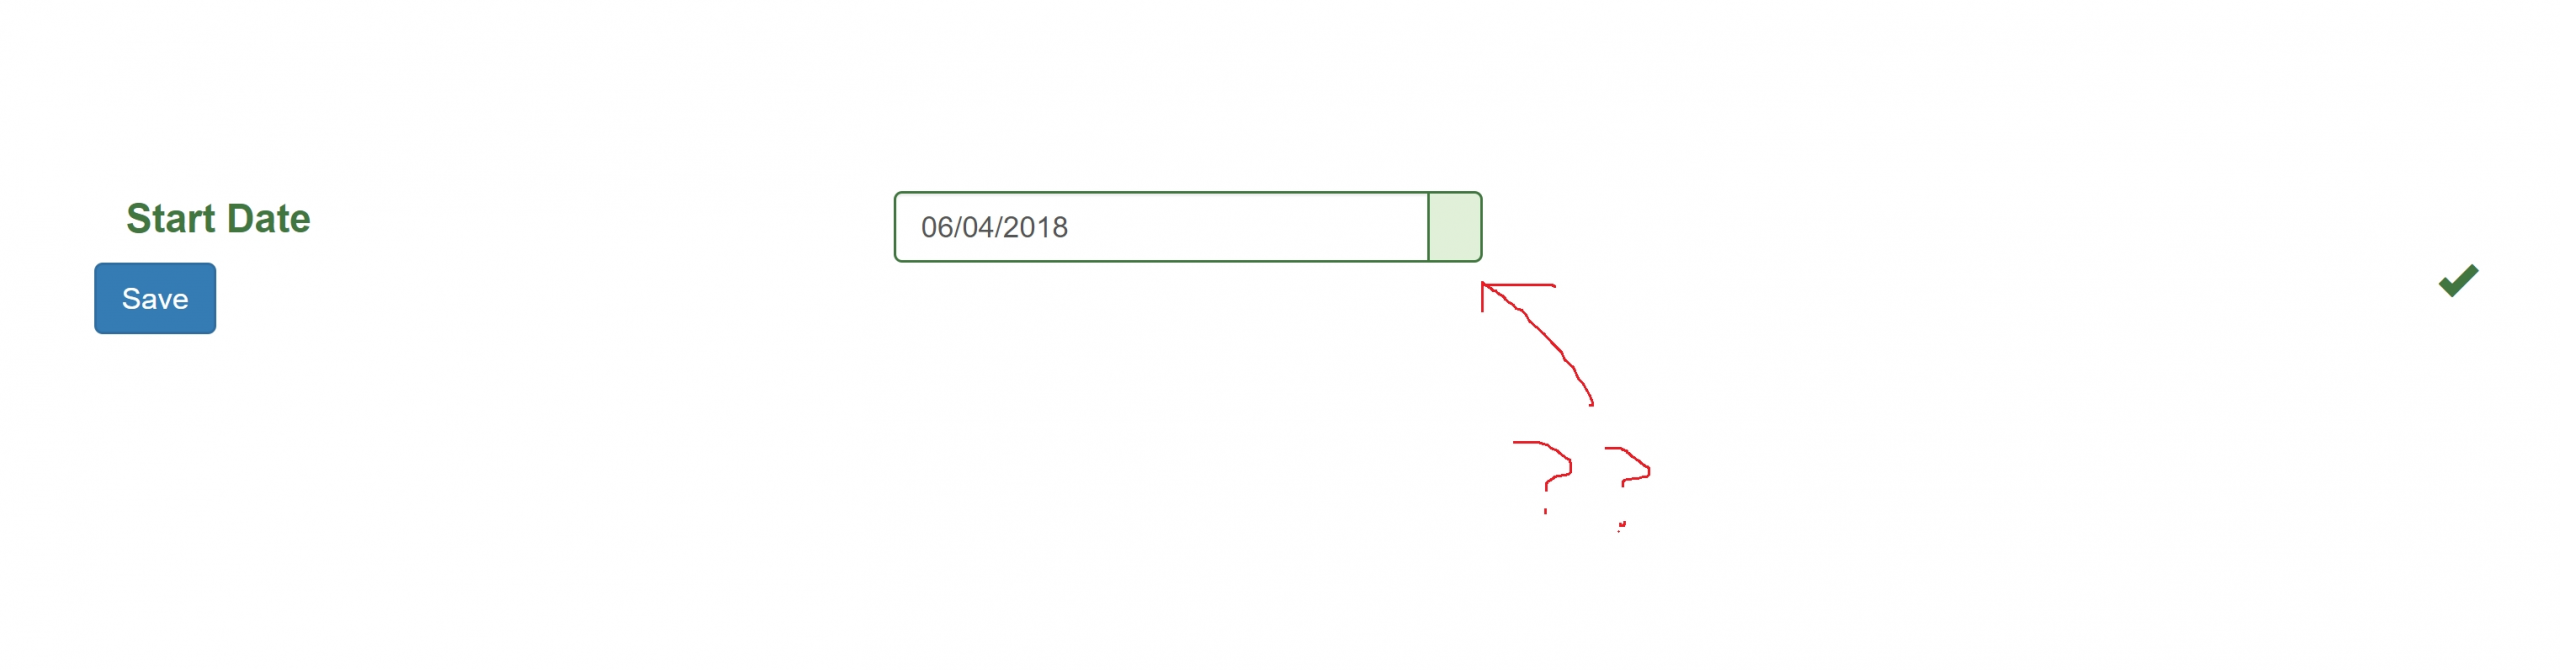 Jquery Date-Picker Glyphicon Icon Missing - Stack Overflow Glyphicon-Calendar Icon Not Showing